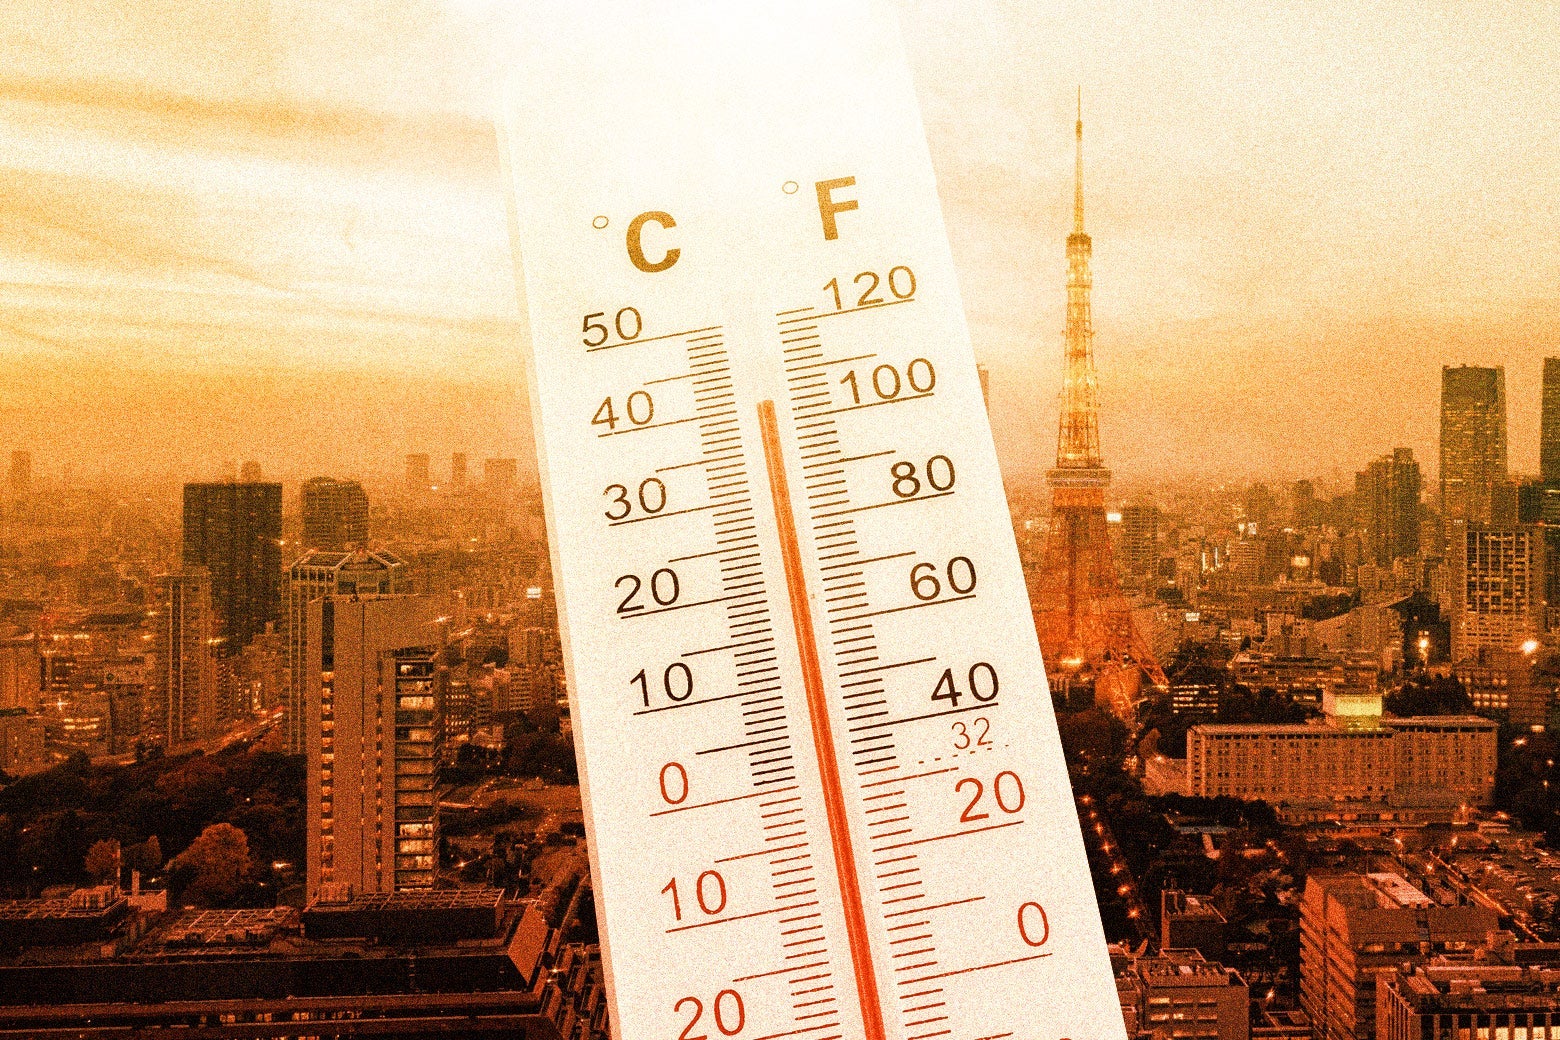 Collage of a thermometer showing a temperature above 100 F laid over a photo of the Tokyo skyline.